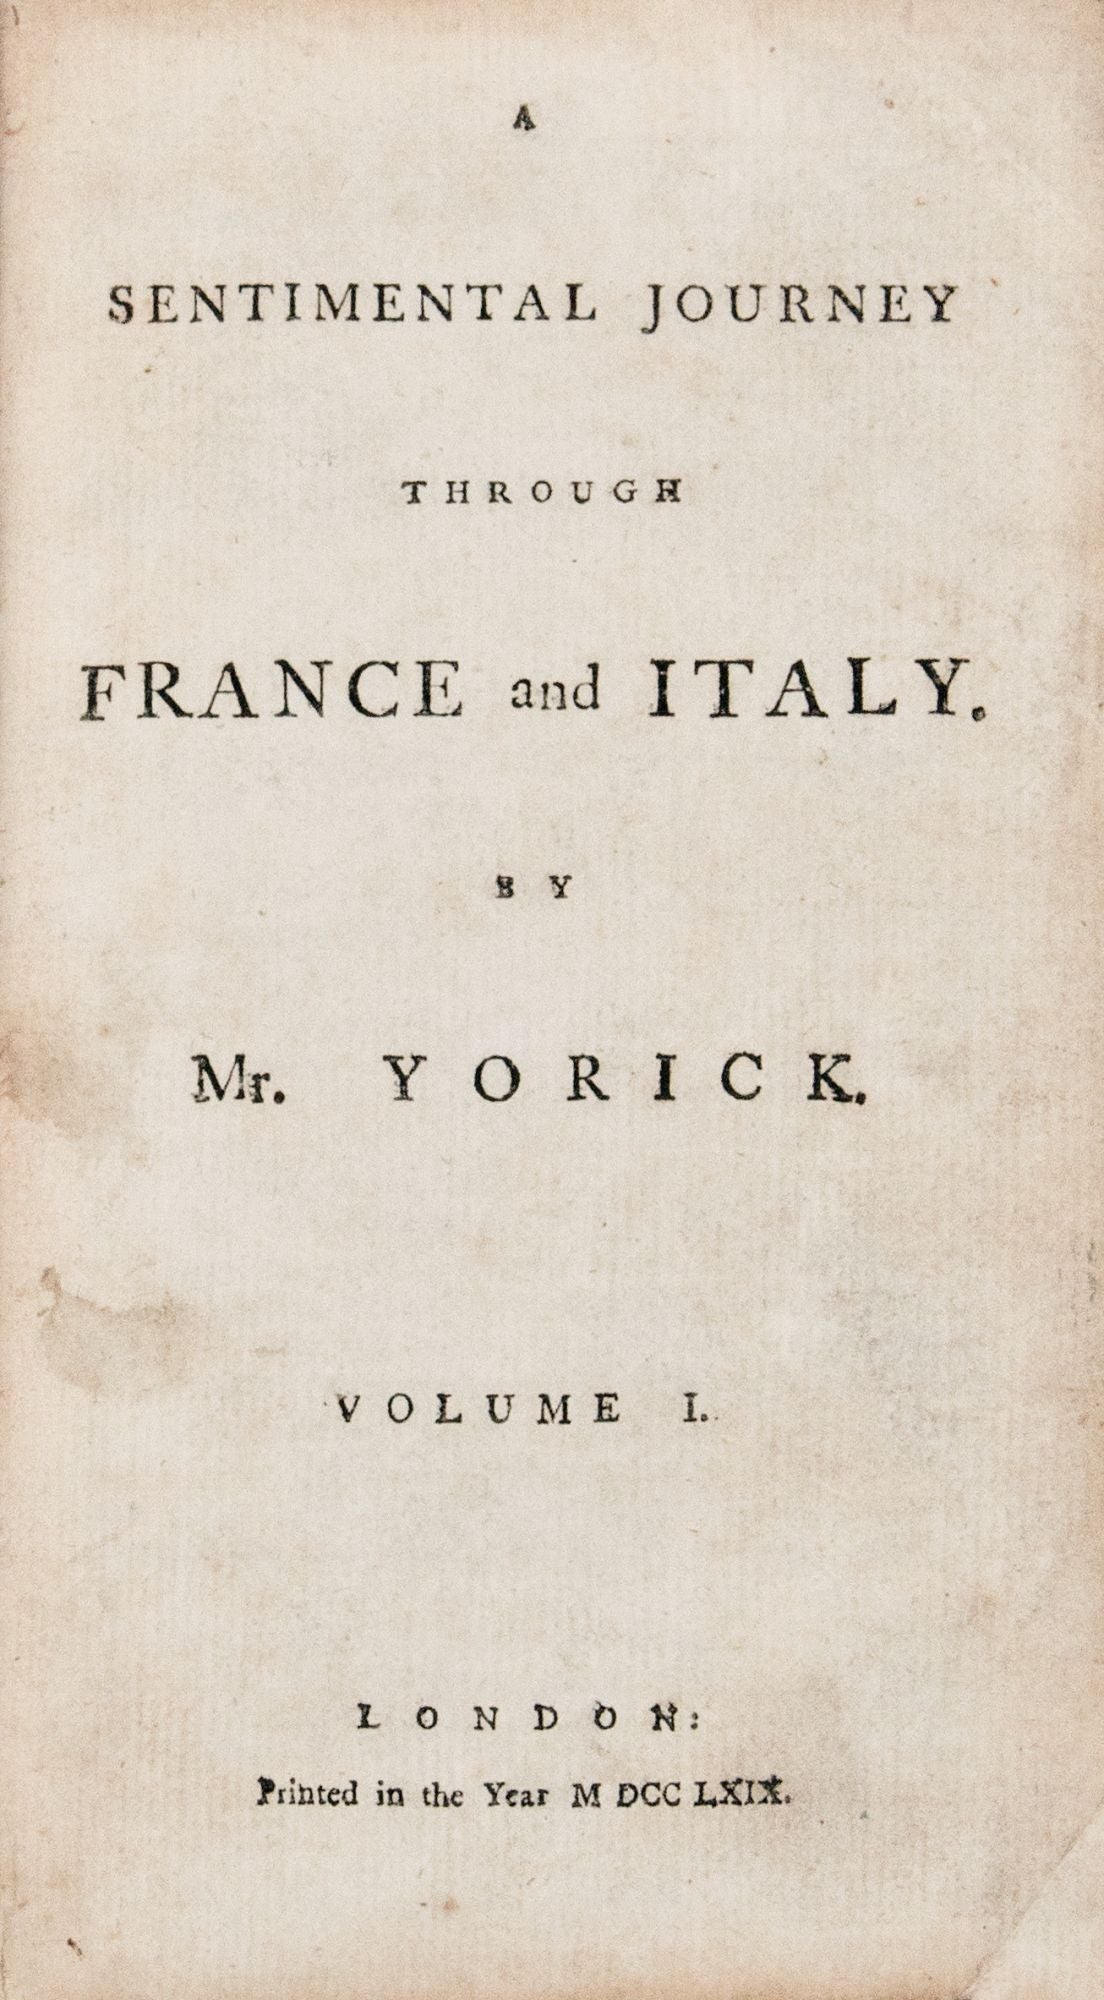 A Sentimental Journey Through France and Italy by Mr. Yorick, bound ...